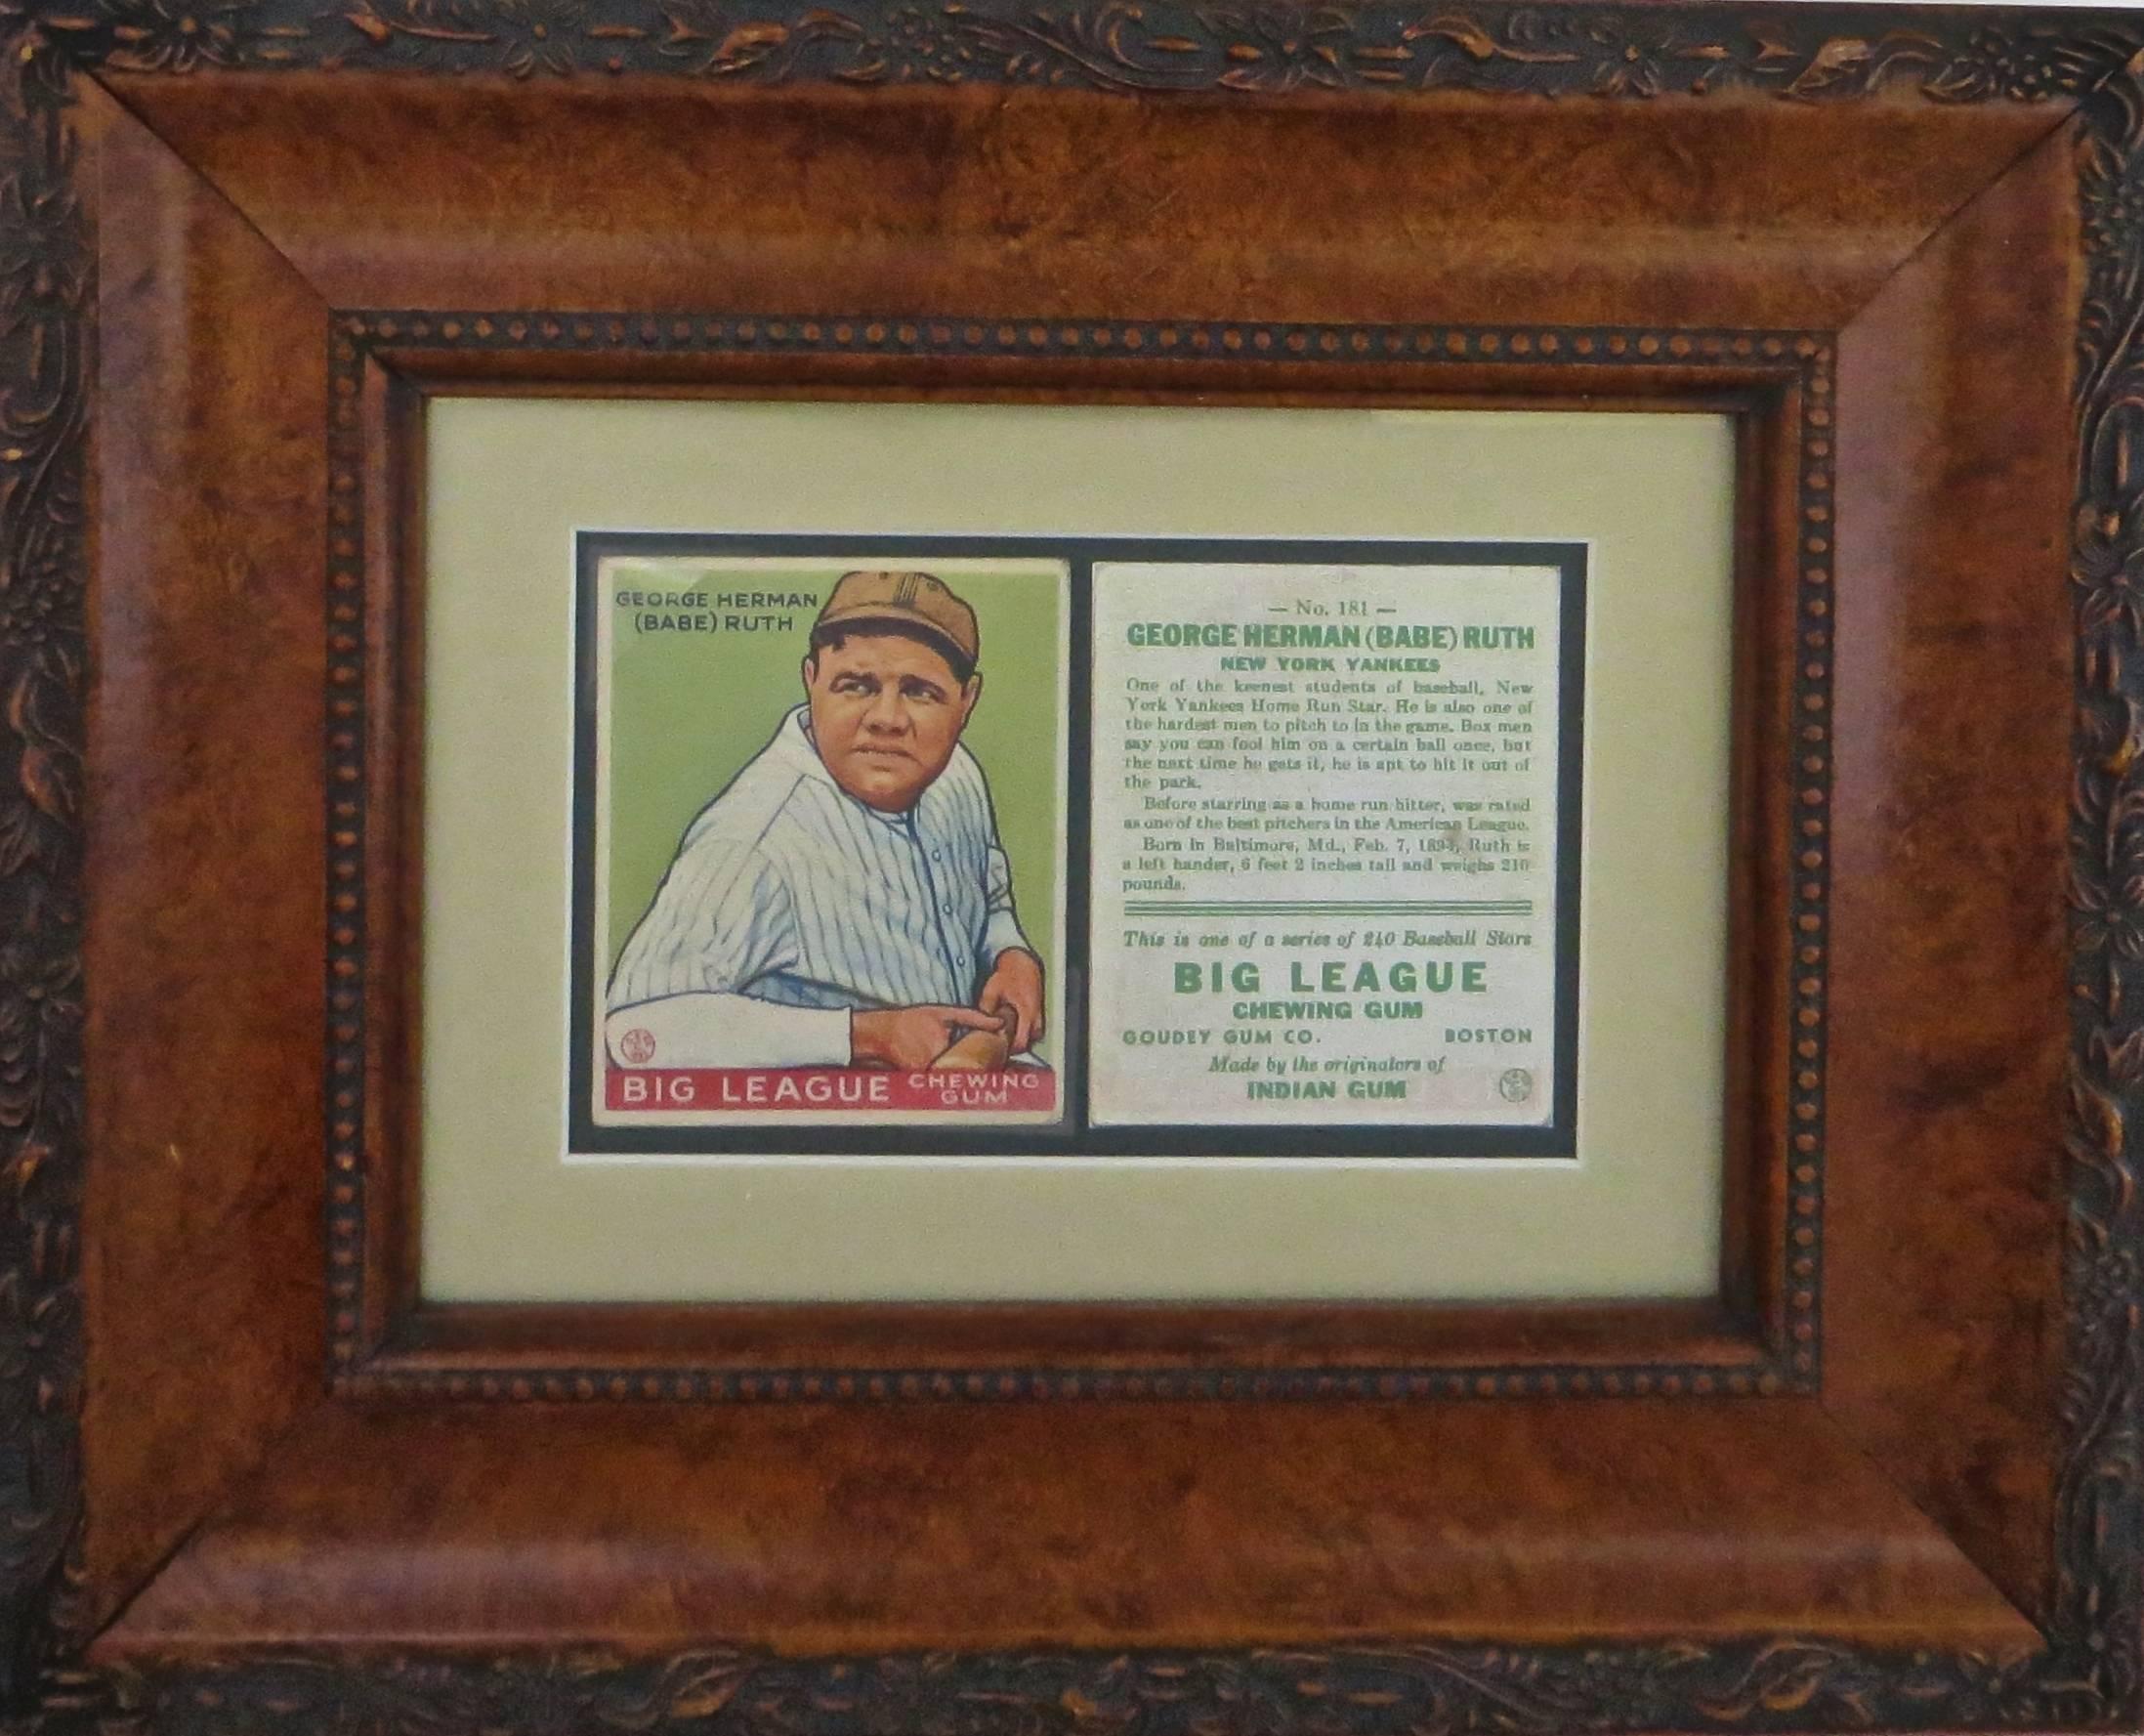 One of the most sought after baseball cards by both baseball card collectors and baseball and sports memorabelia collectors, the Goudey #181 Babe Ruth baseball card is one of only a few portrait (non action) cards of, unquestionably, the most famous